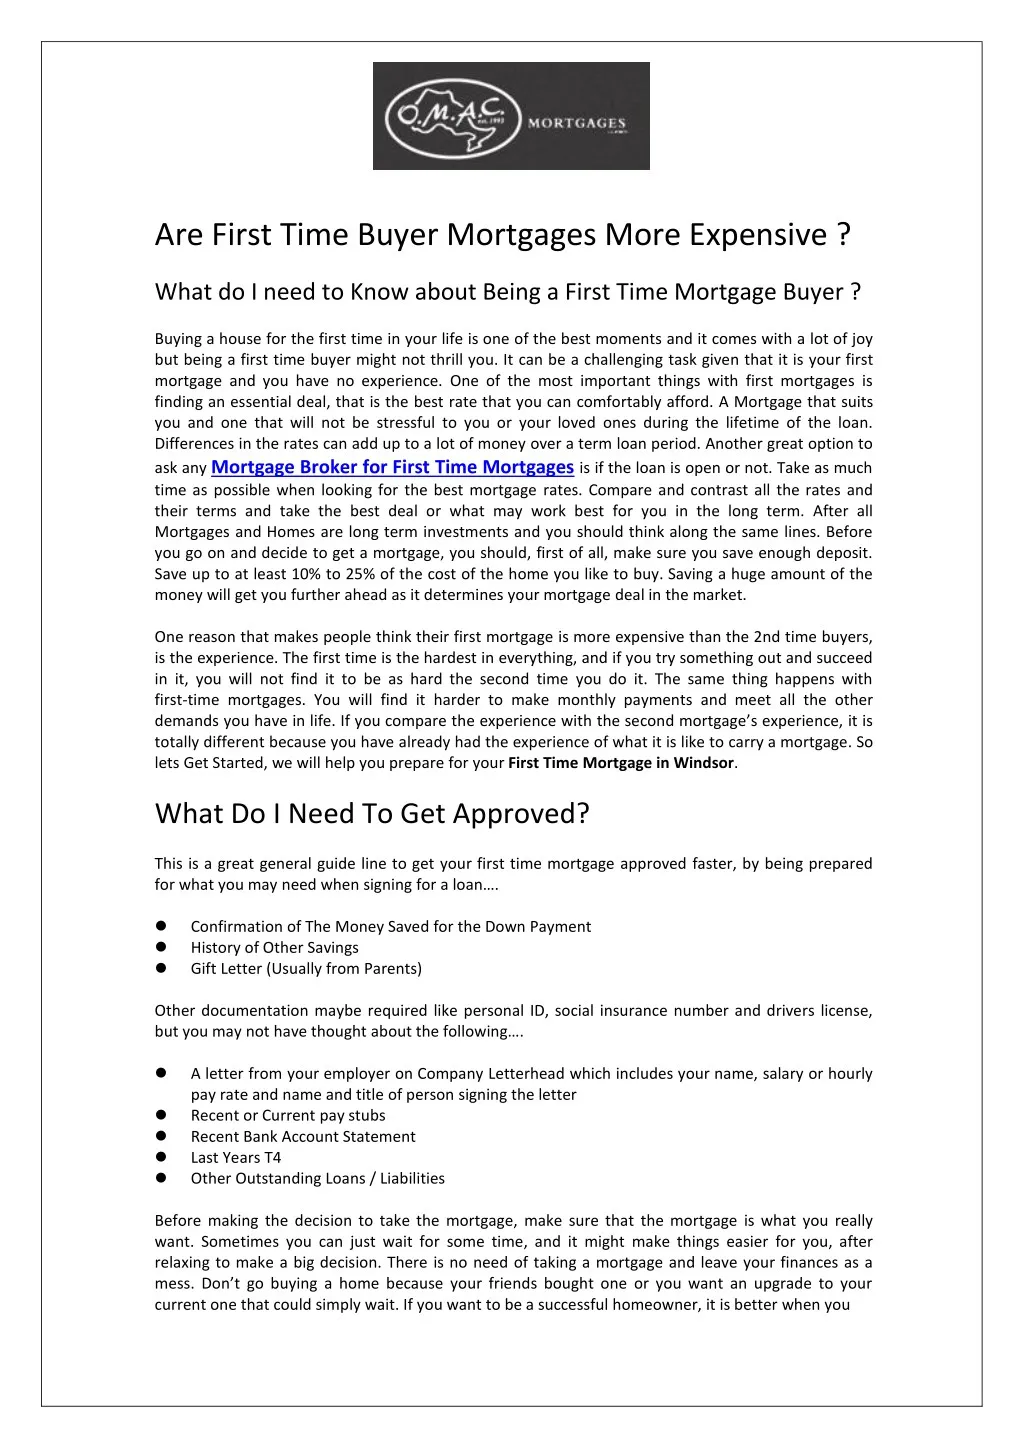 are first time buyer mortgages more expensive